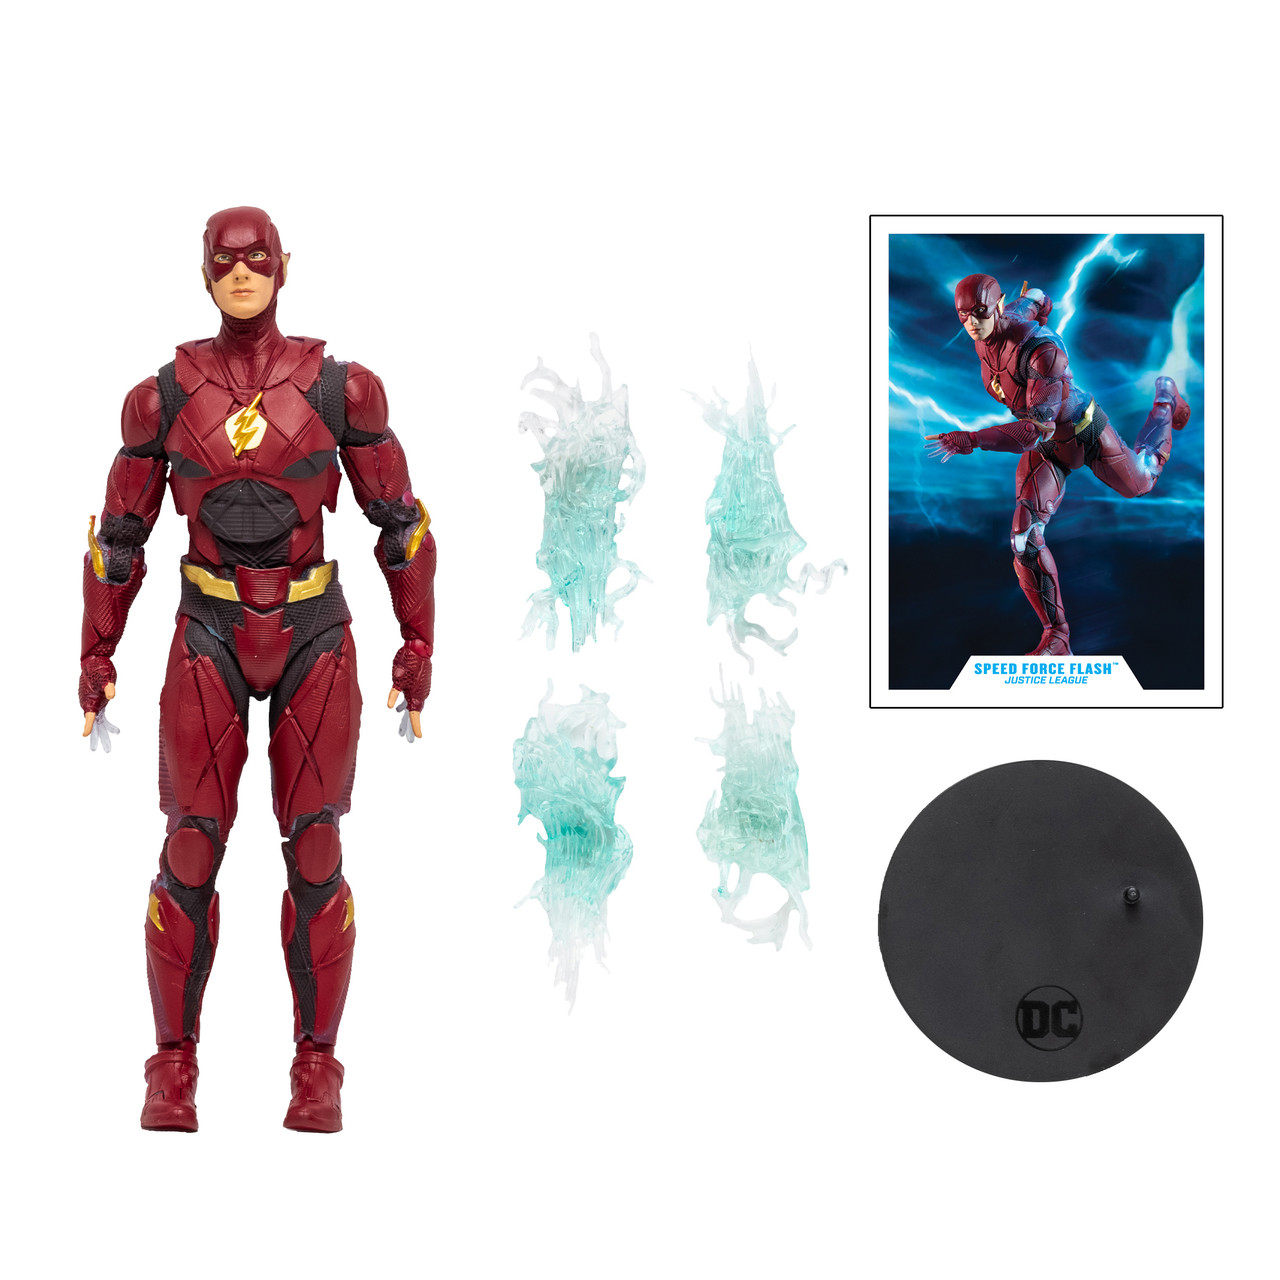 Speed Force Flash Justice League (DC Multiverse) NYCC Exclusive 7